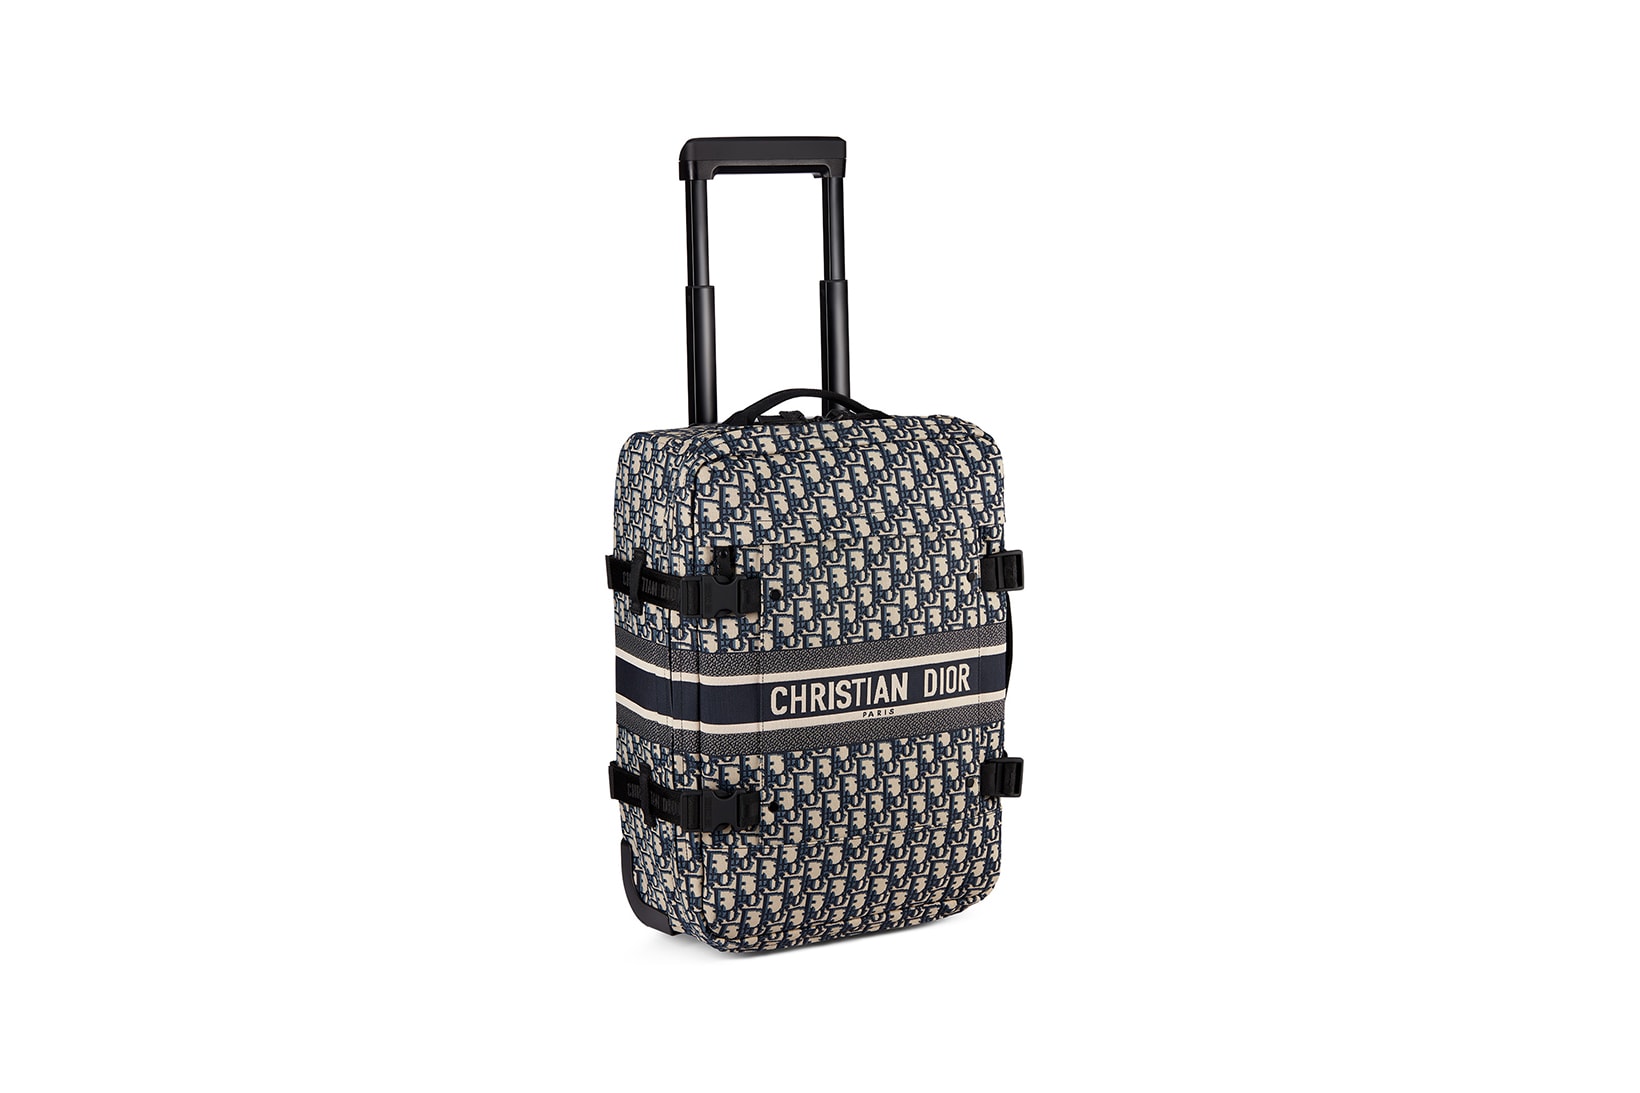 dior diortravel collection backpacks suitcases luggages maria grazia chiuri